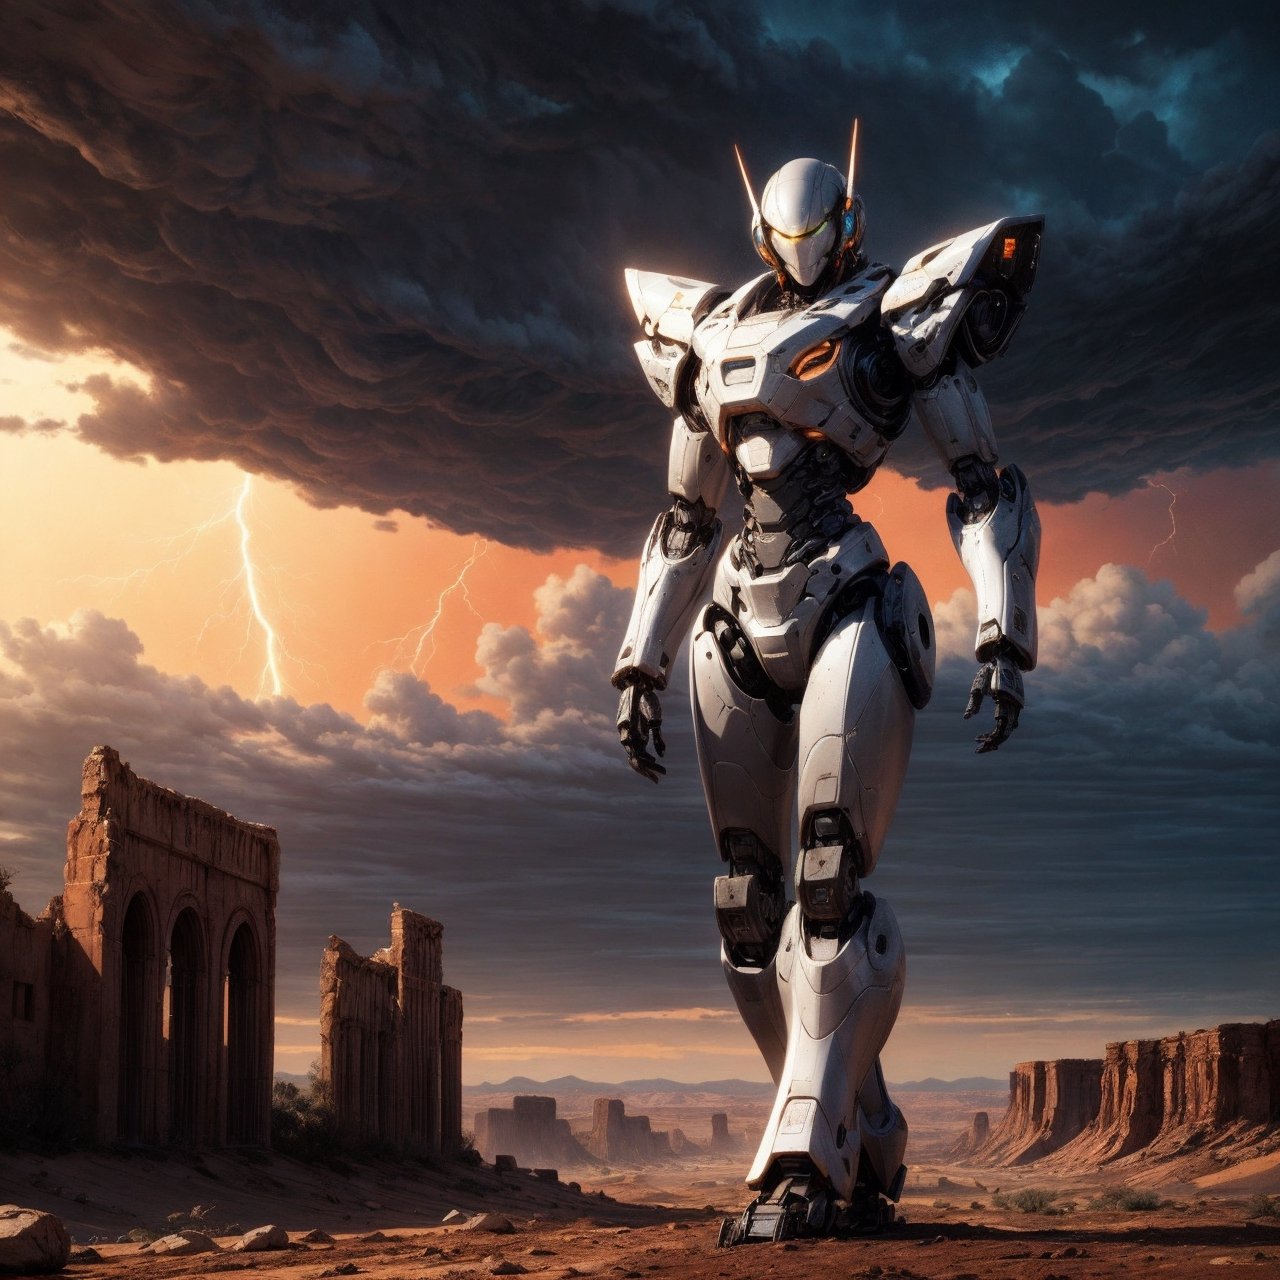 a giant, 20 ft tall android humanoid shaped robot is walking across the desert menacing. the android is metallic and machine like, rusty parts, shiny metal. a beautiful female explorer is sitting on the robots shoulder showing the way forward. a detailed background of a vast alien desert landscape, sandstone ruins, sandstone hills, red sand, a stormy sky, dark menacing storm clouds, lightening illuminating the black clouds. windy, deserted, , SD 1.5, perfect hands,